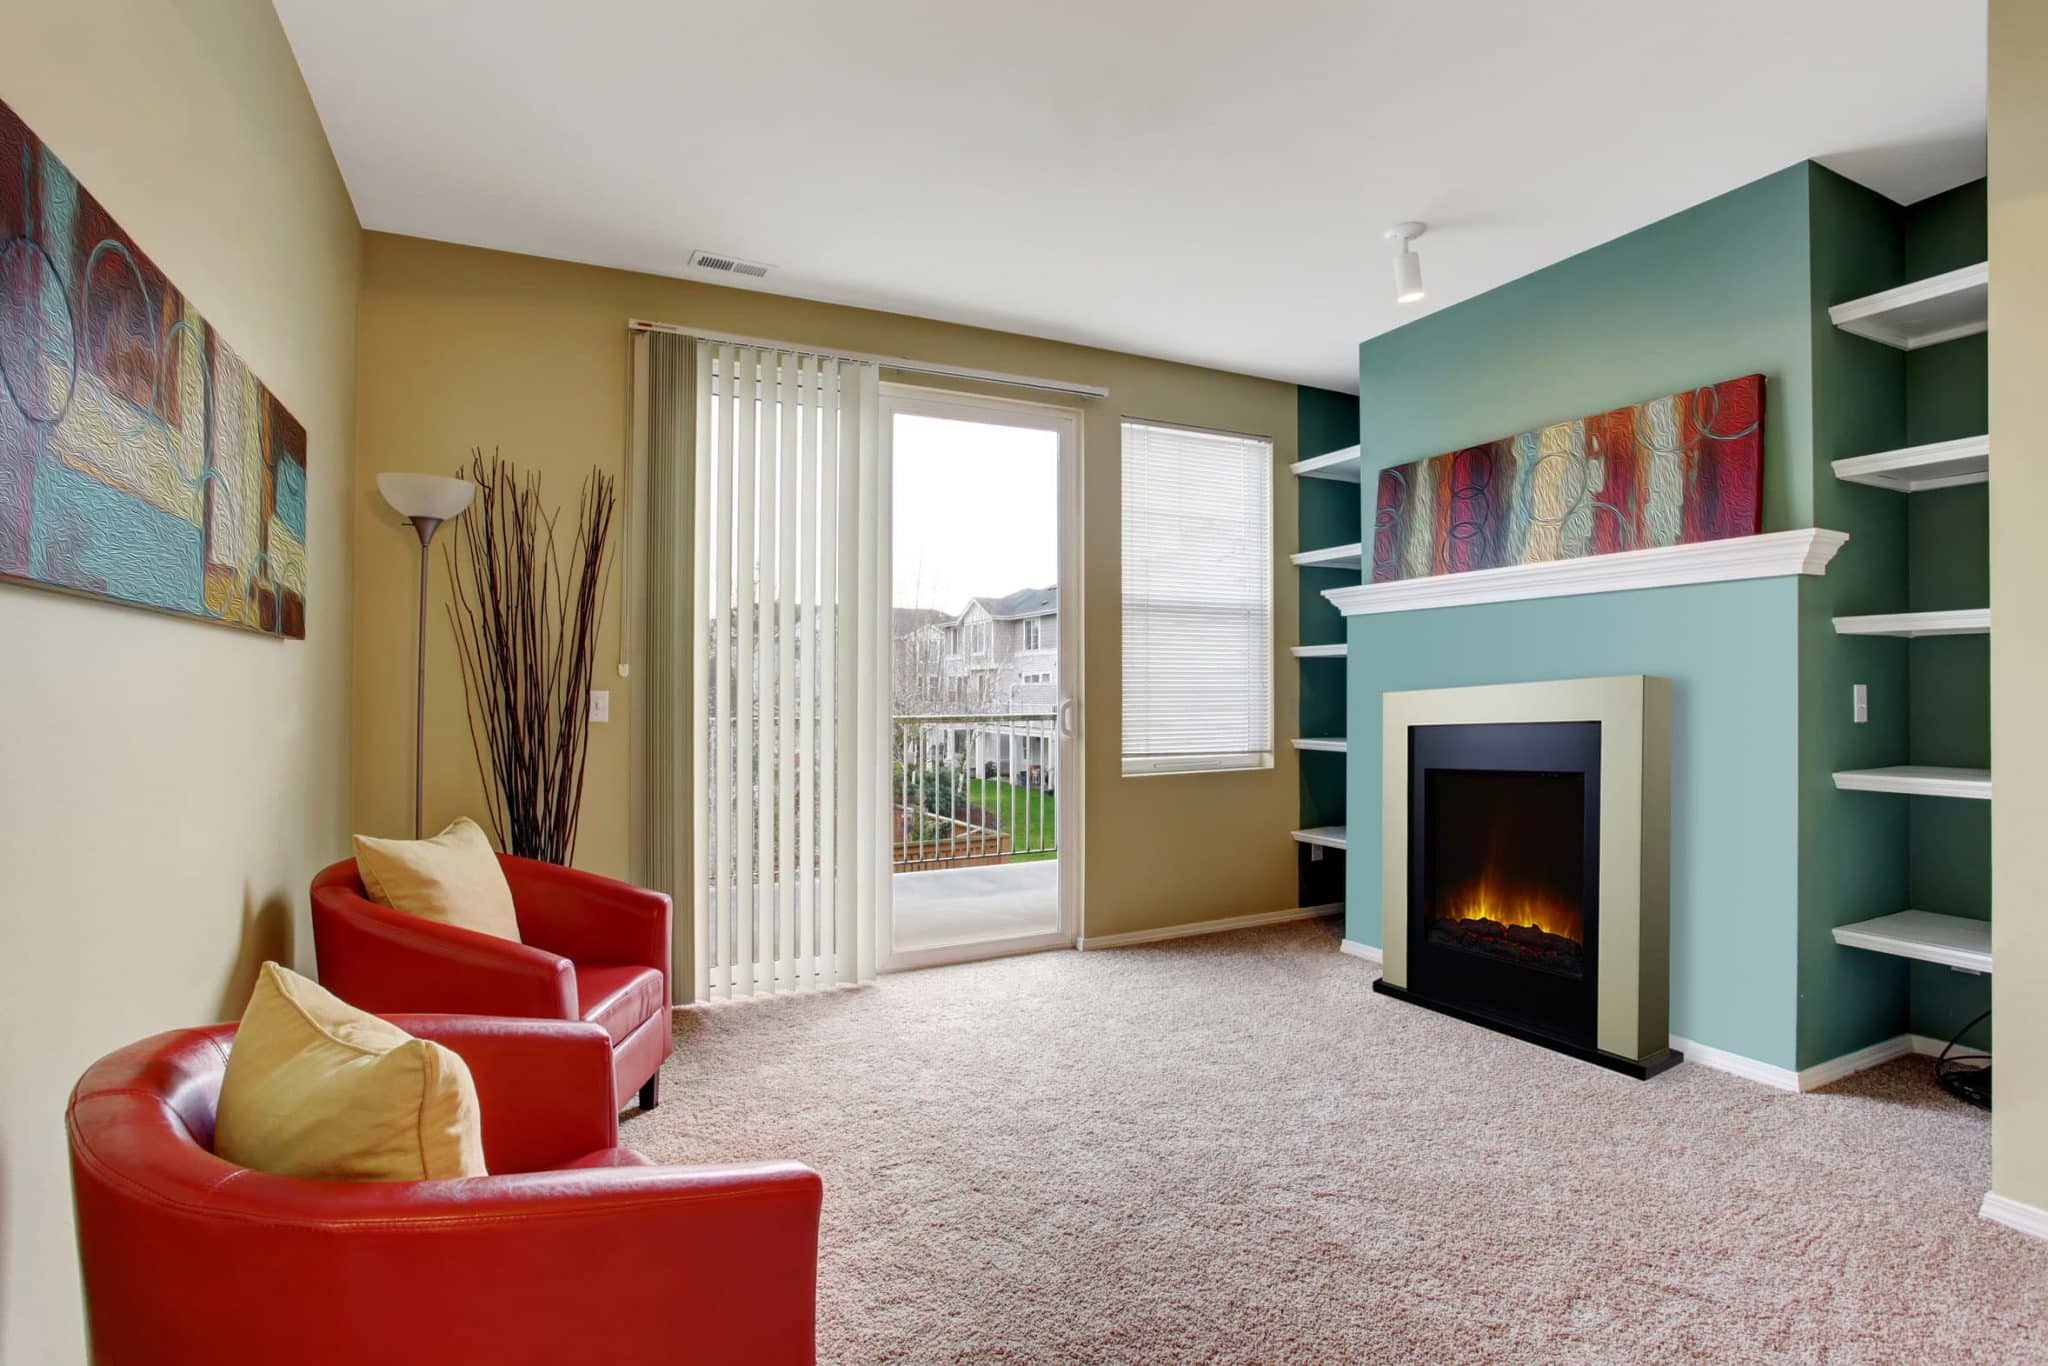 Carpet and fireplace in living room